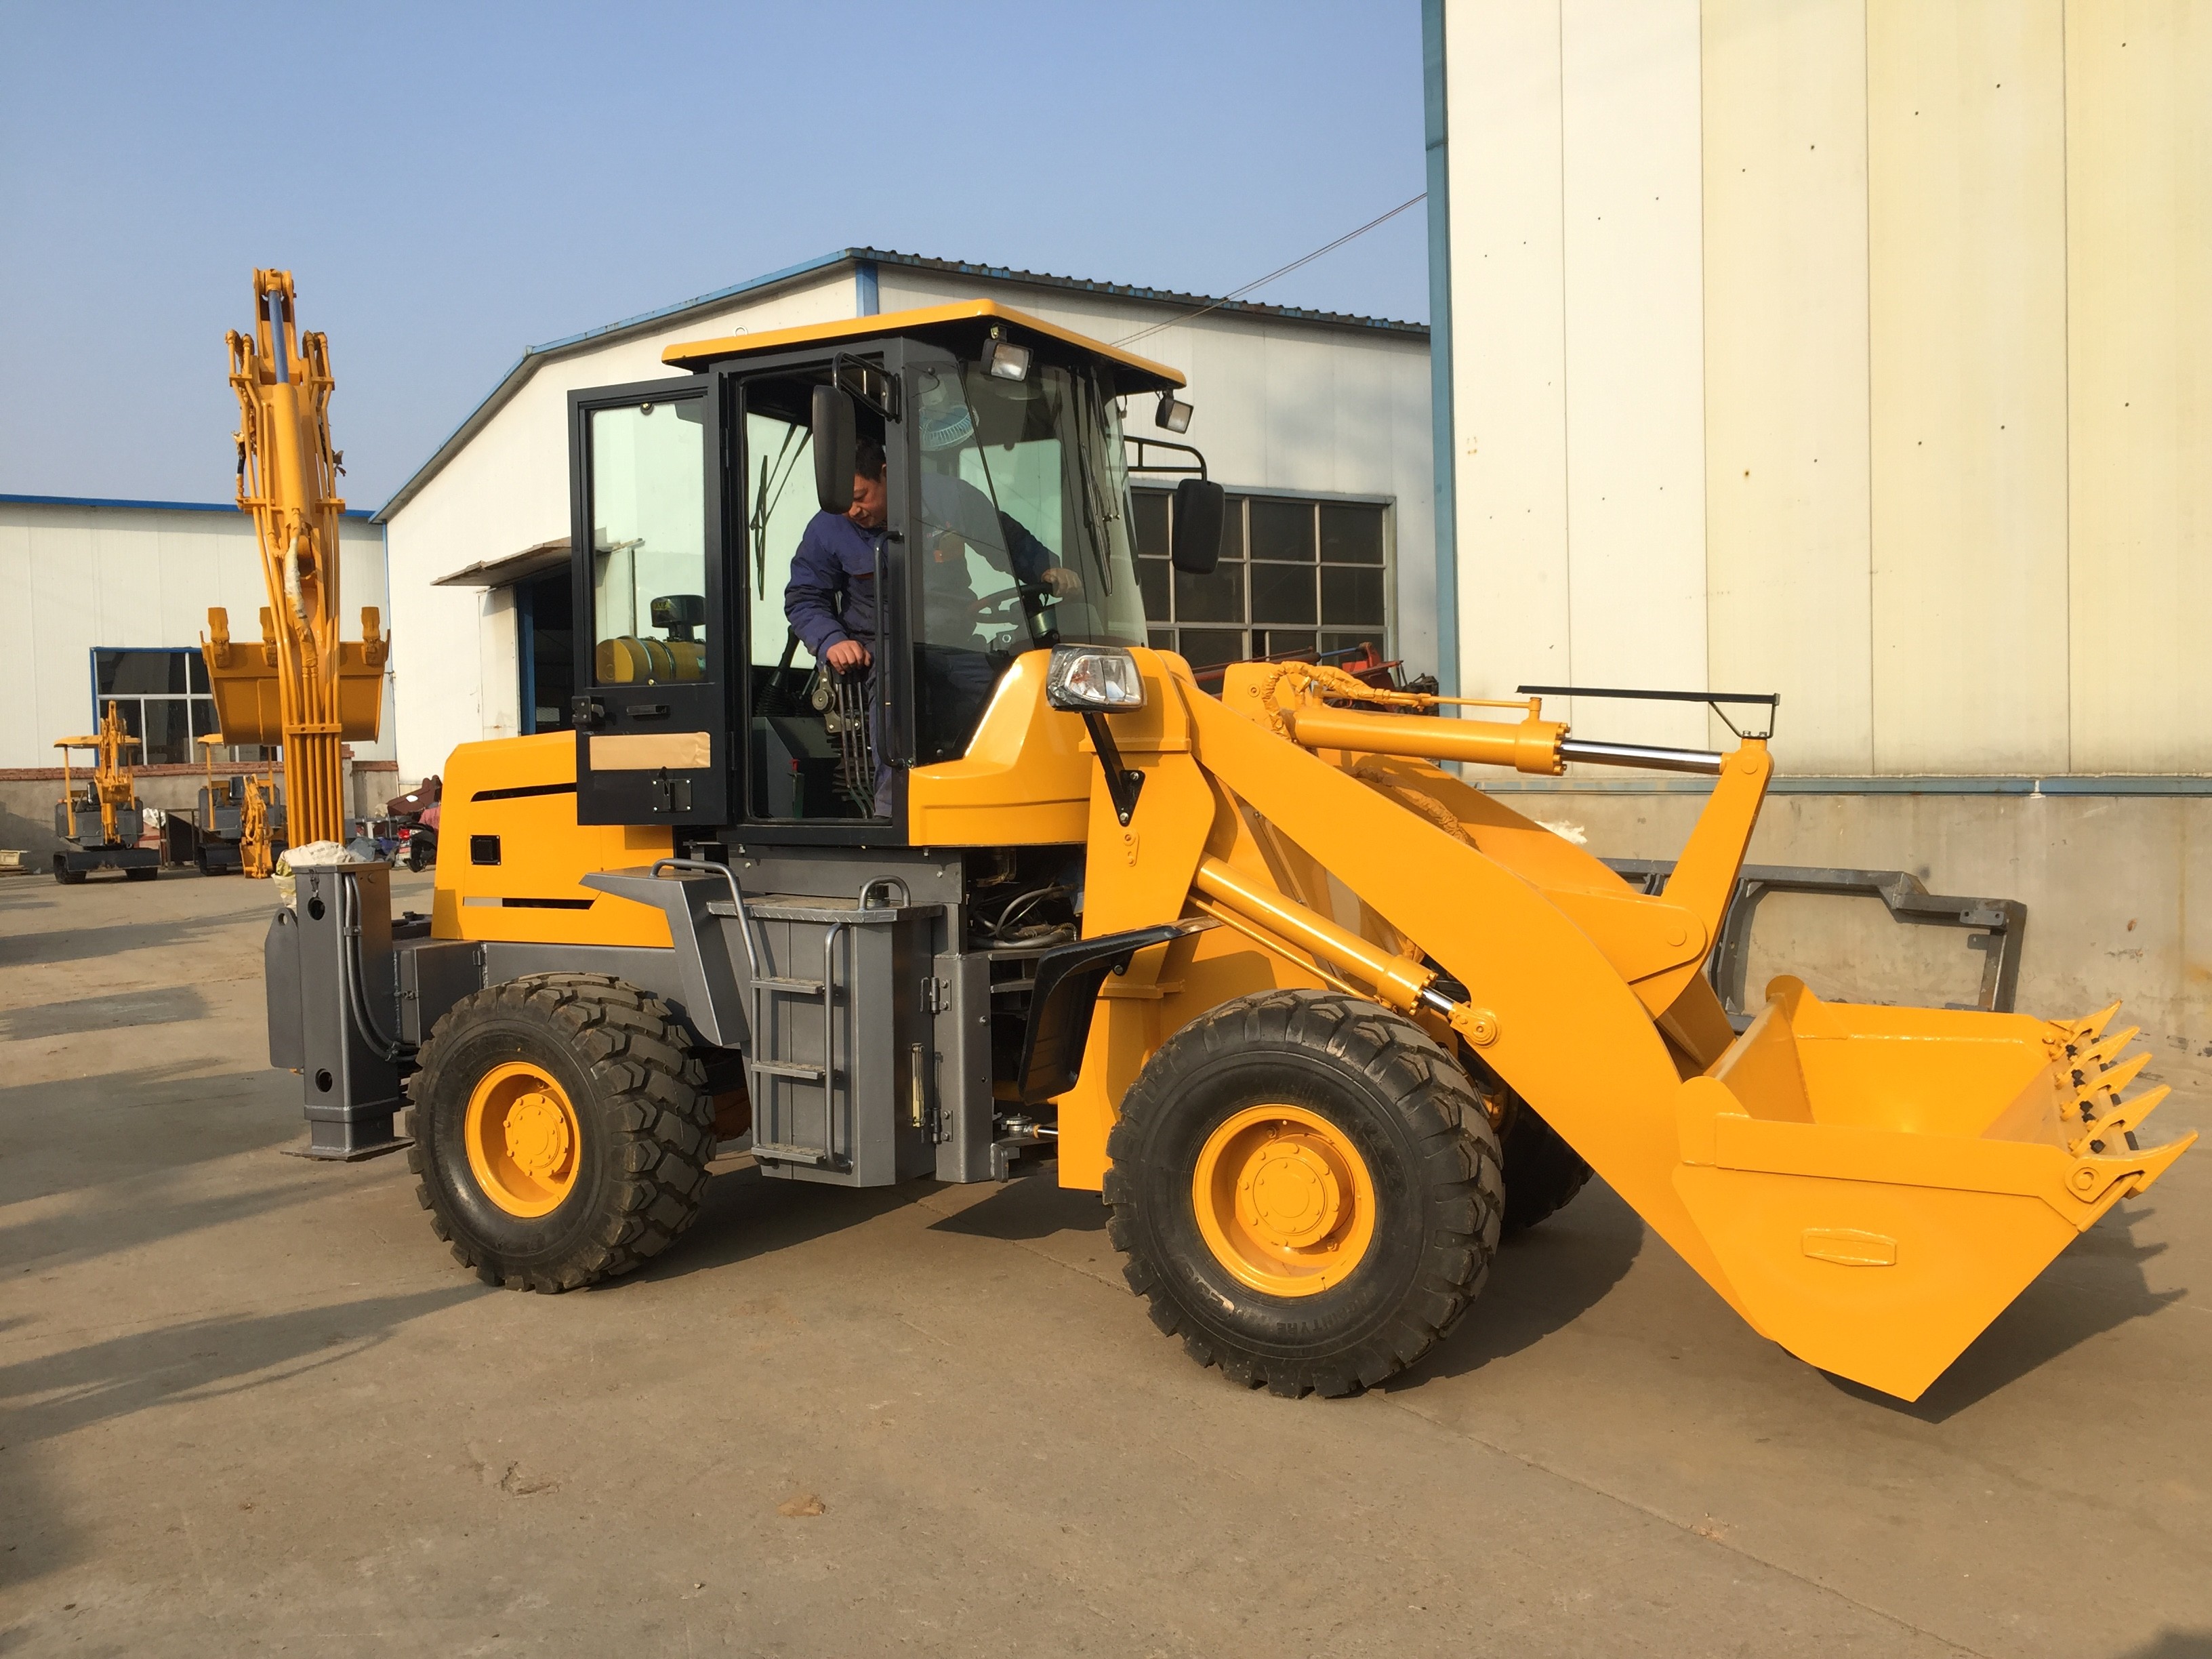 Quality WZ10-50 15Mpa 3ton Earth Excavation Machine With Closed Cabin for sale